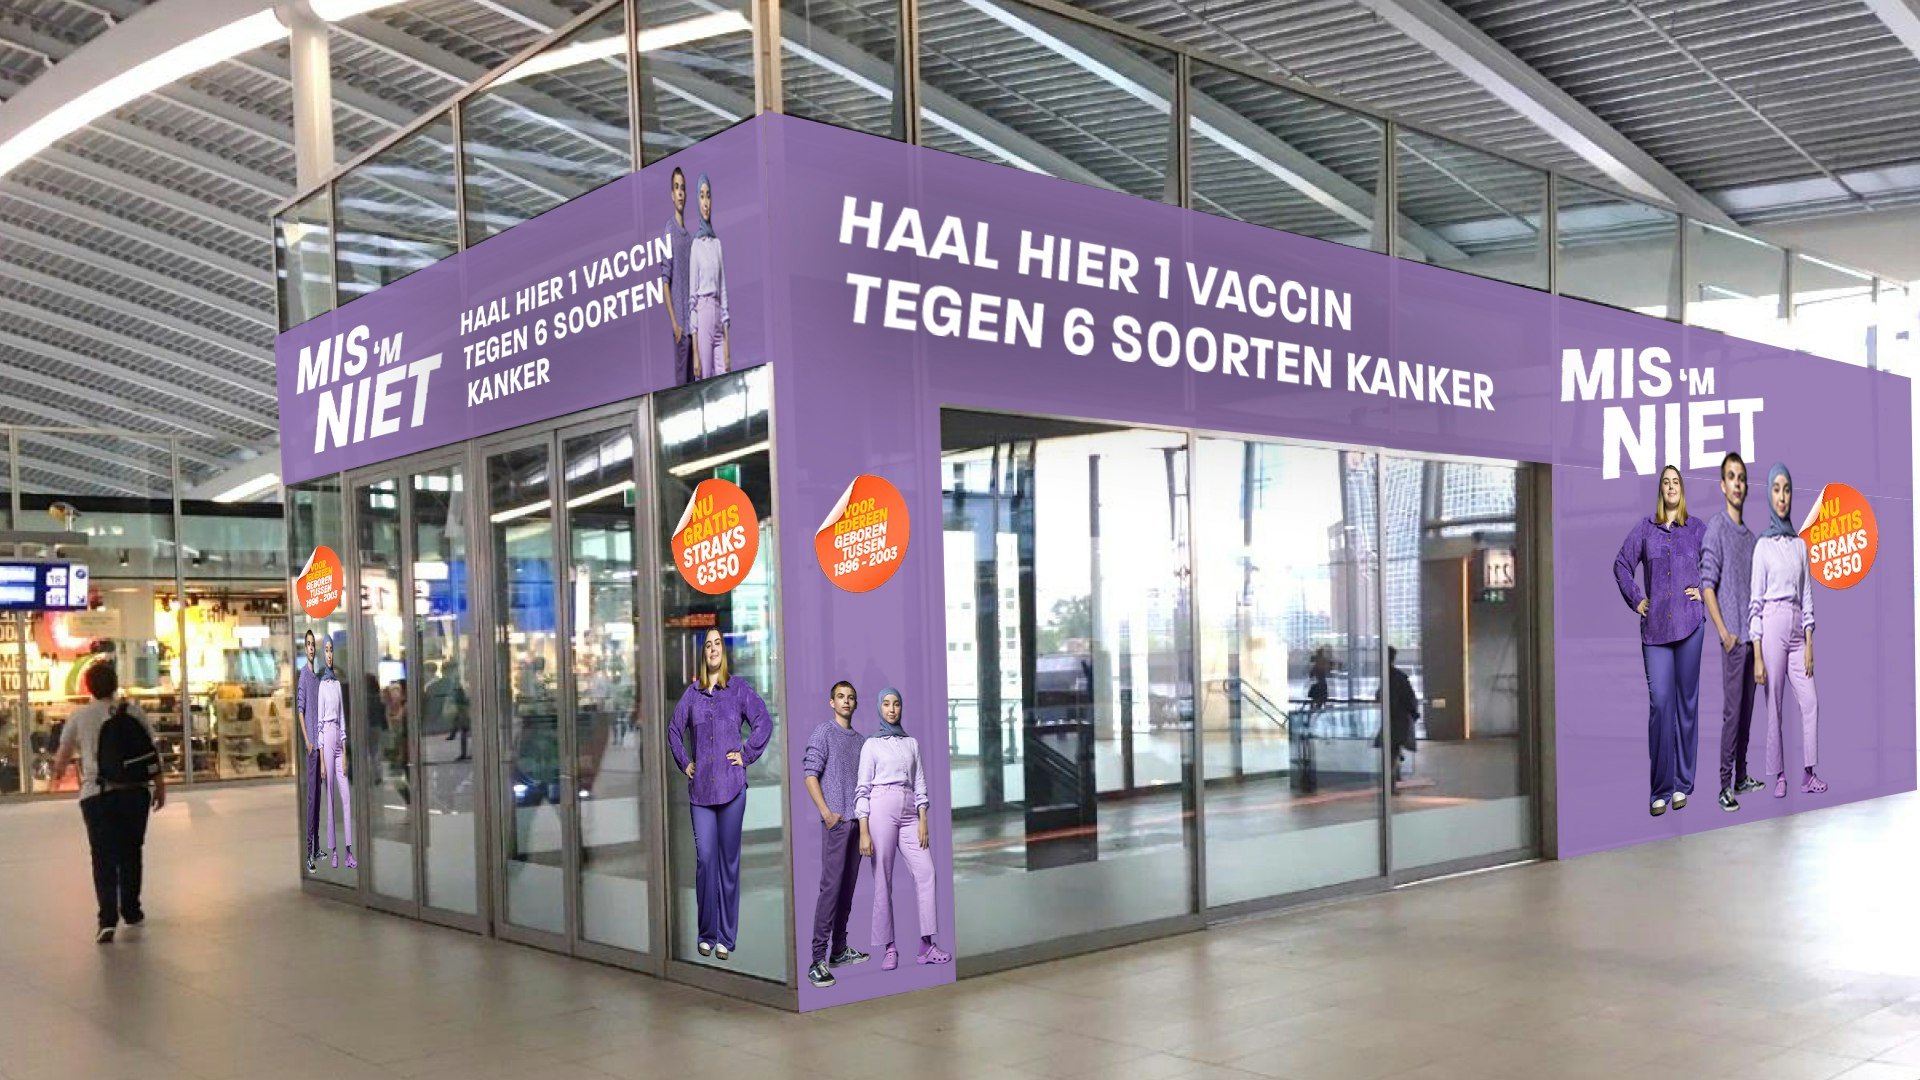 Get Free Human Papillomavirus (HPV) Vaccine for Young Adults at Utrecht Central Station – Protection Against Six Types of Cancer